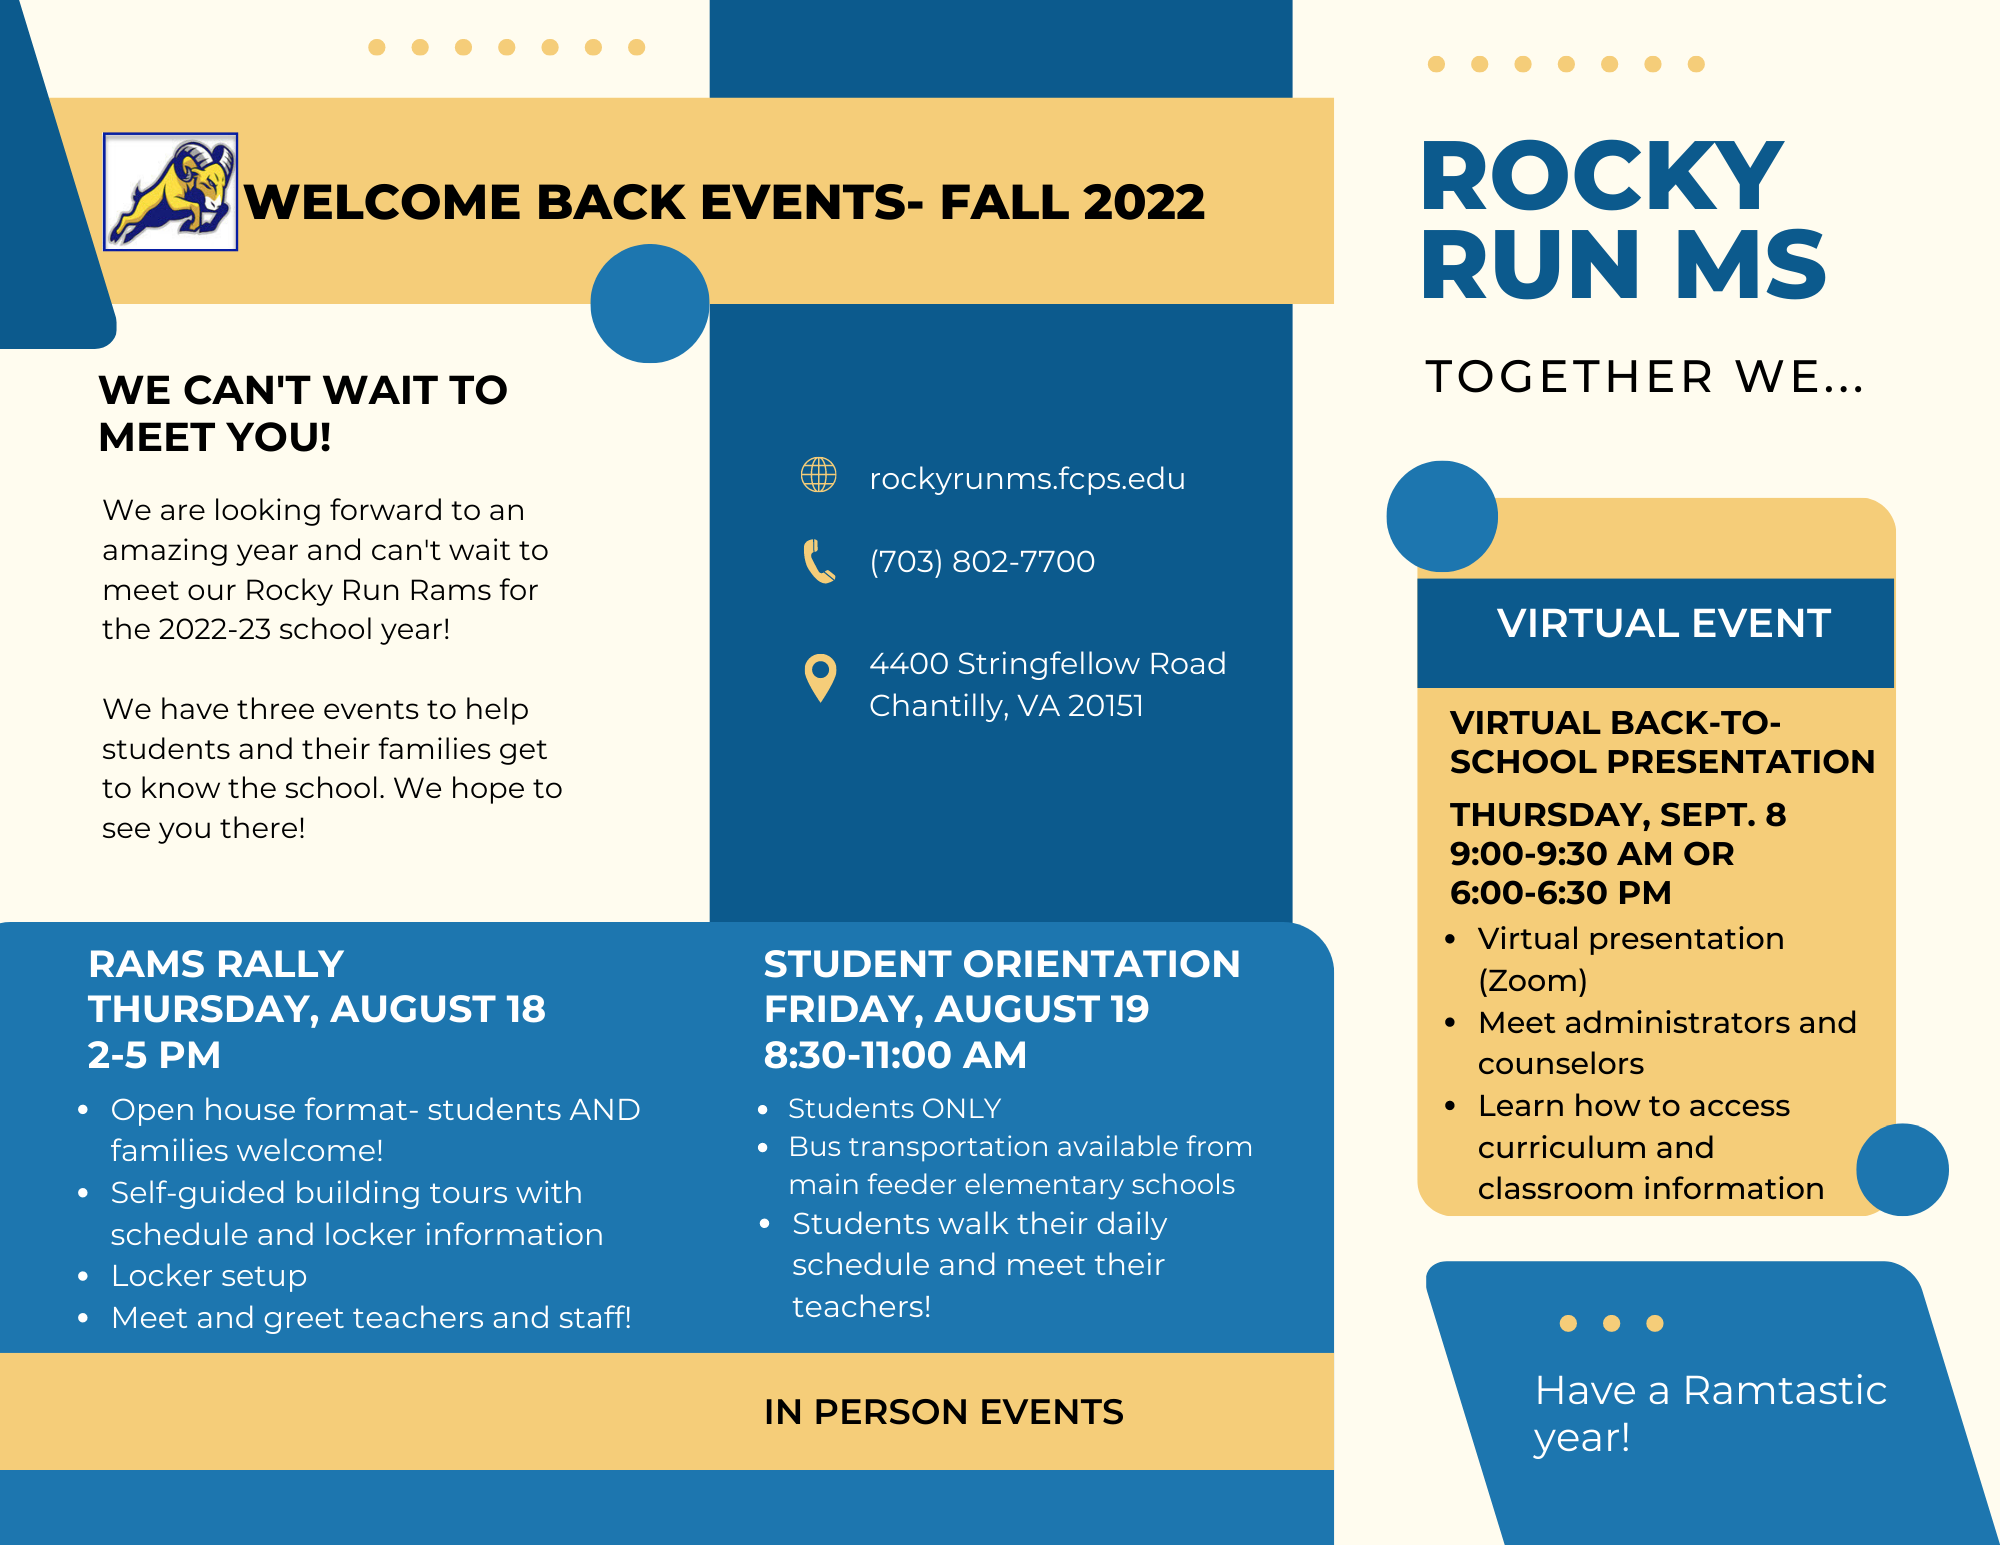 Image summarizing back to school events for RRMS